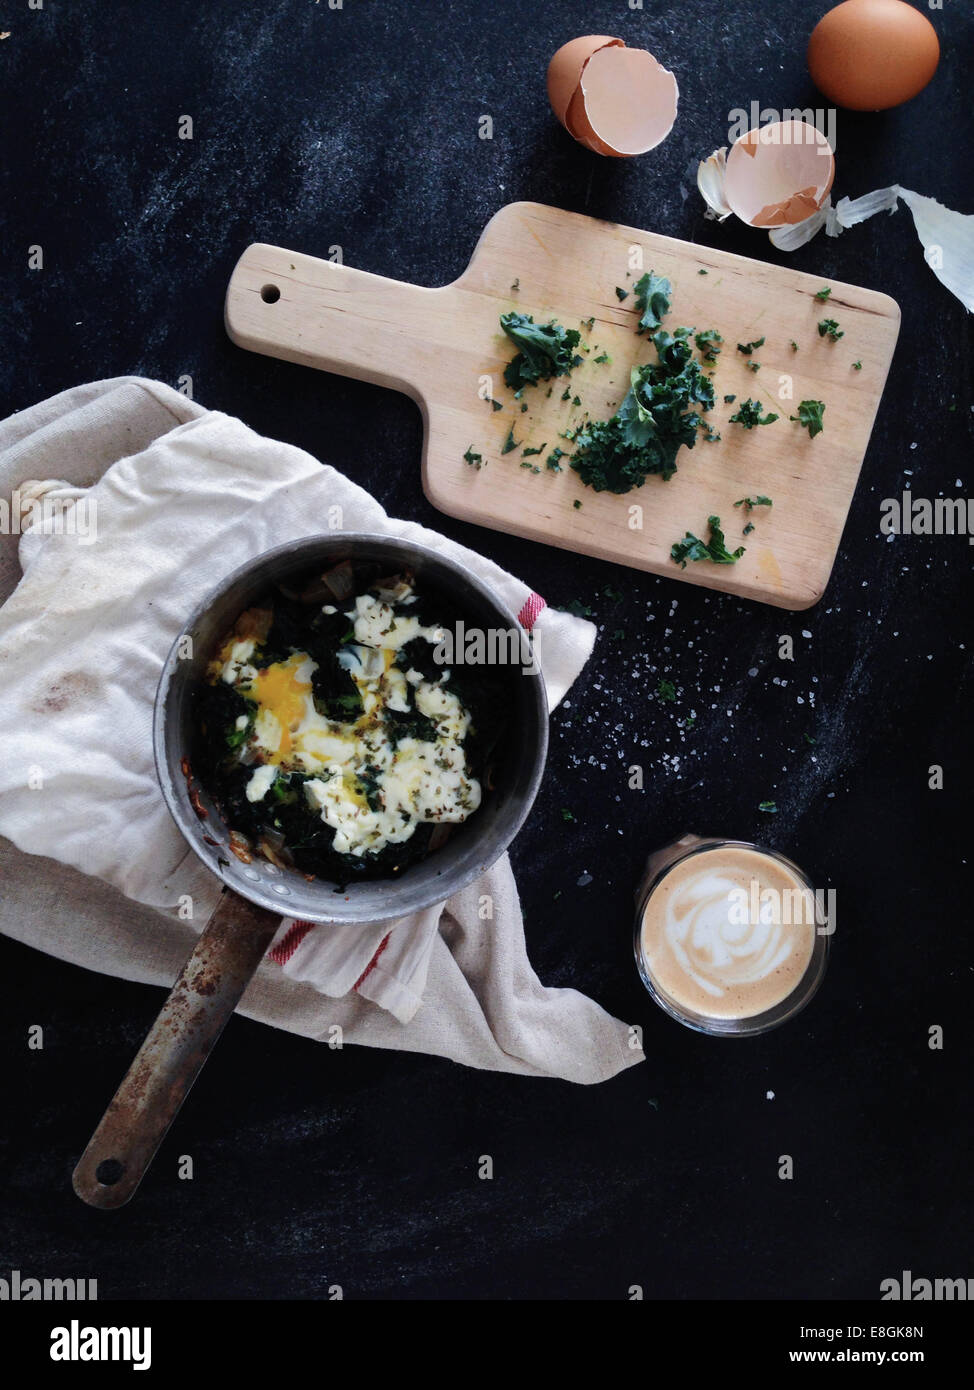 Goats cheese and Kale frittata with latte coffee Stock Photo